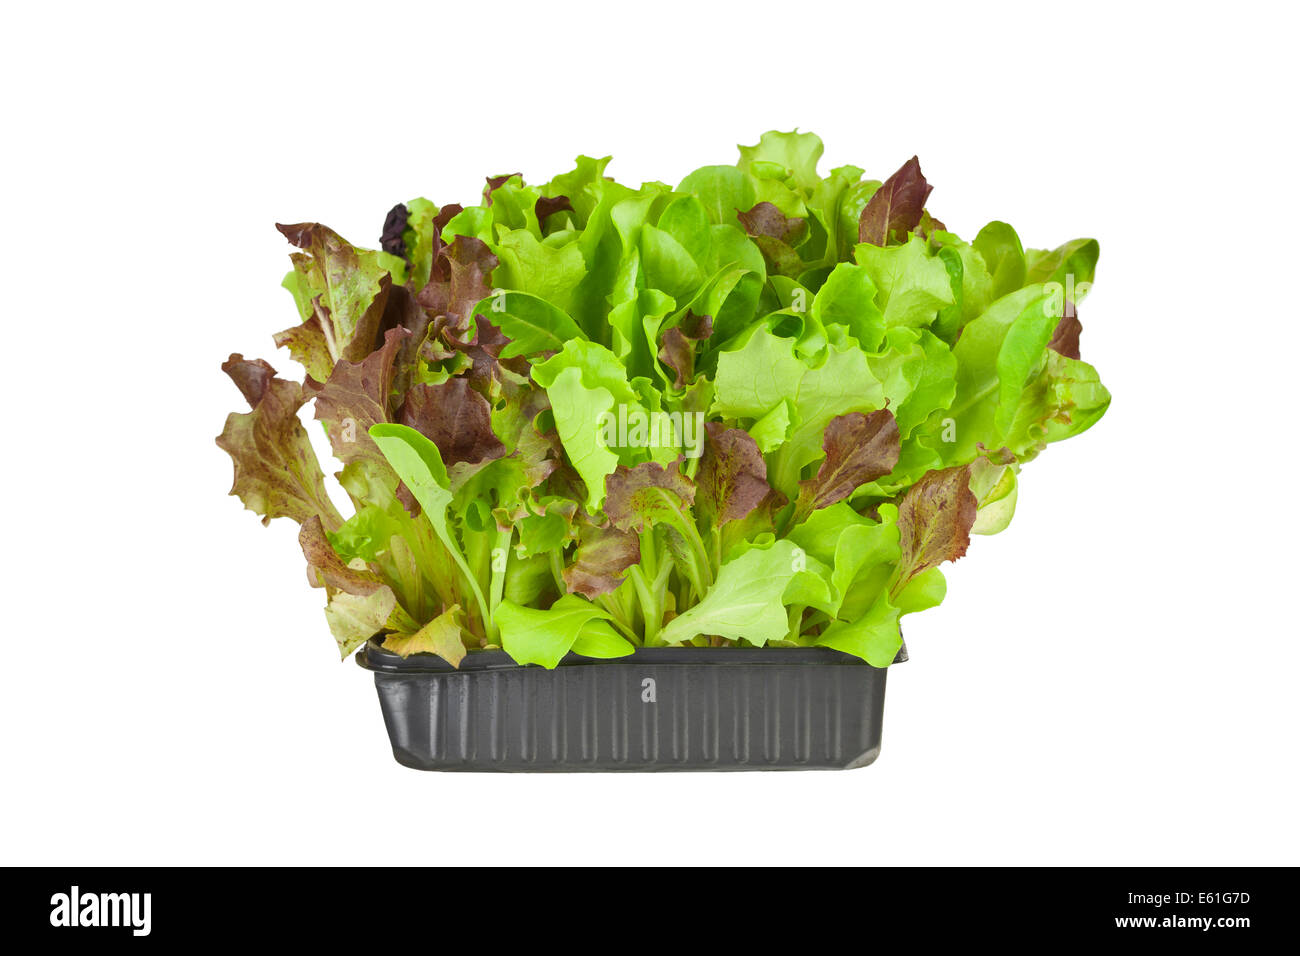 Living salad, red and green baby leaf lettuce in a tray isolated against a white background Stock Photo